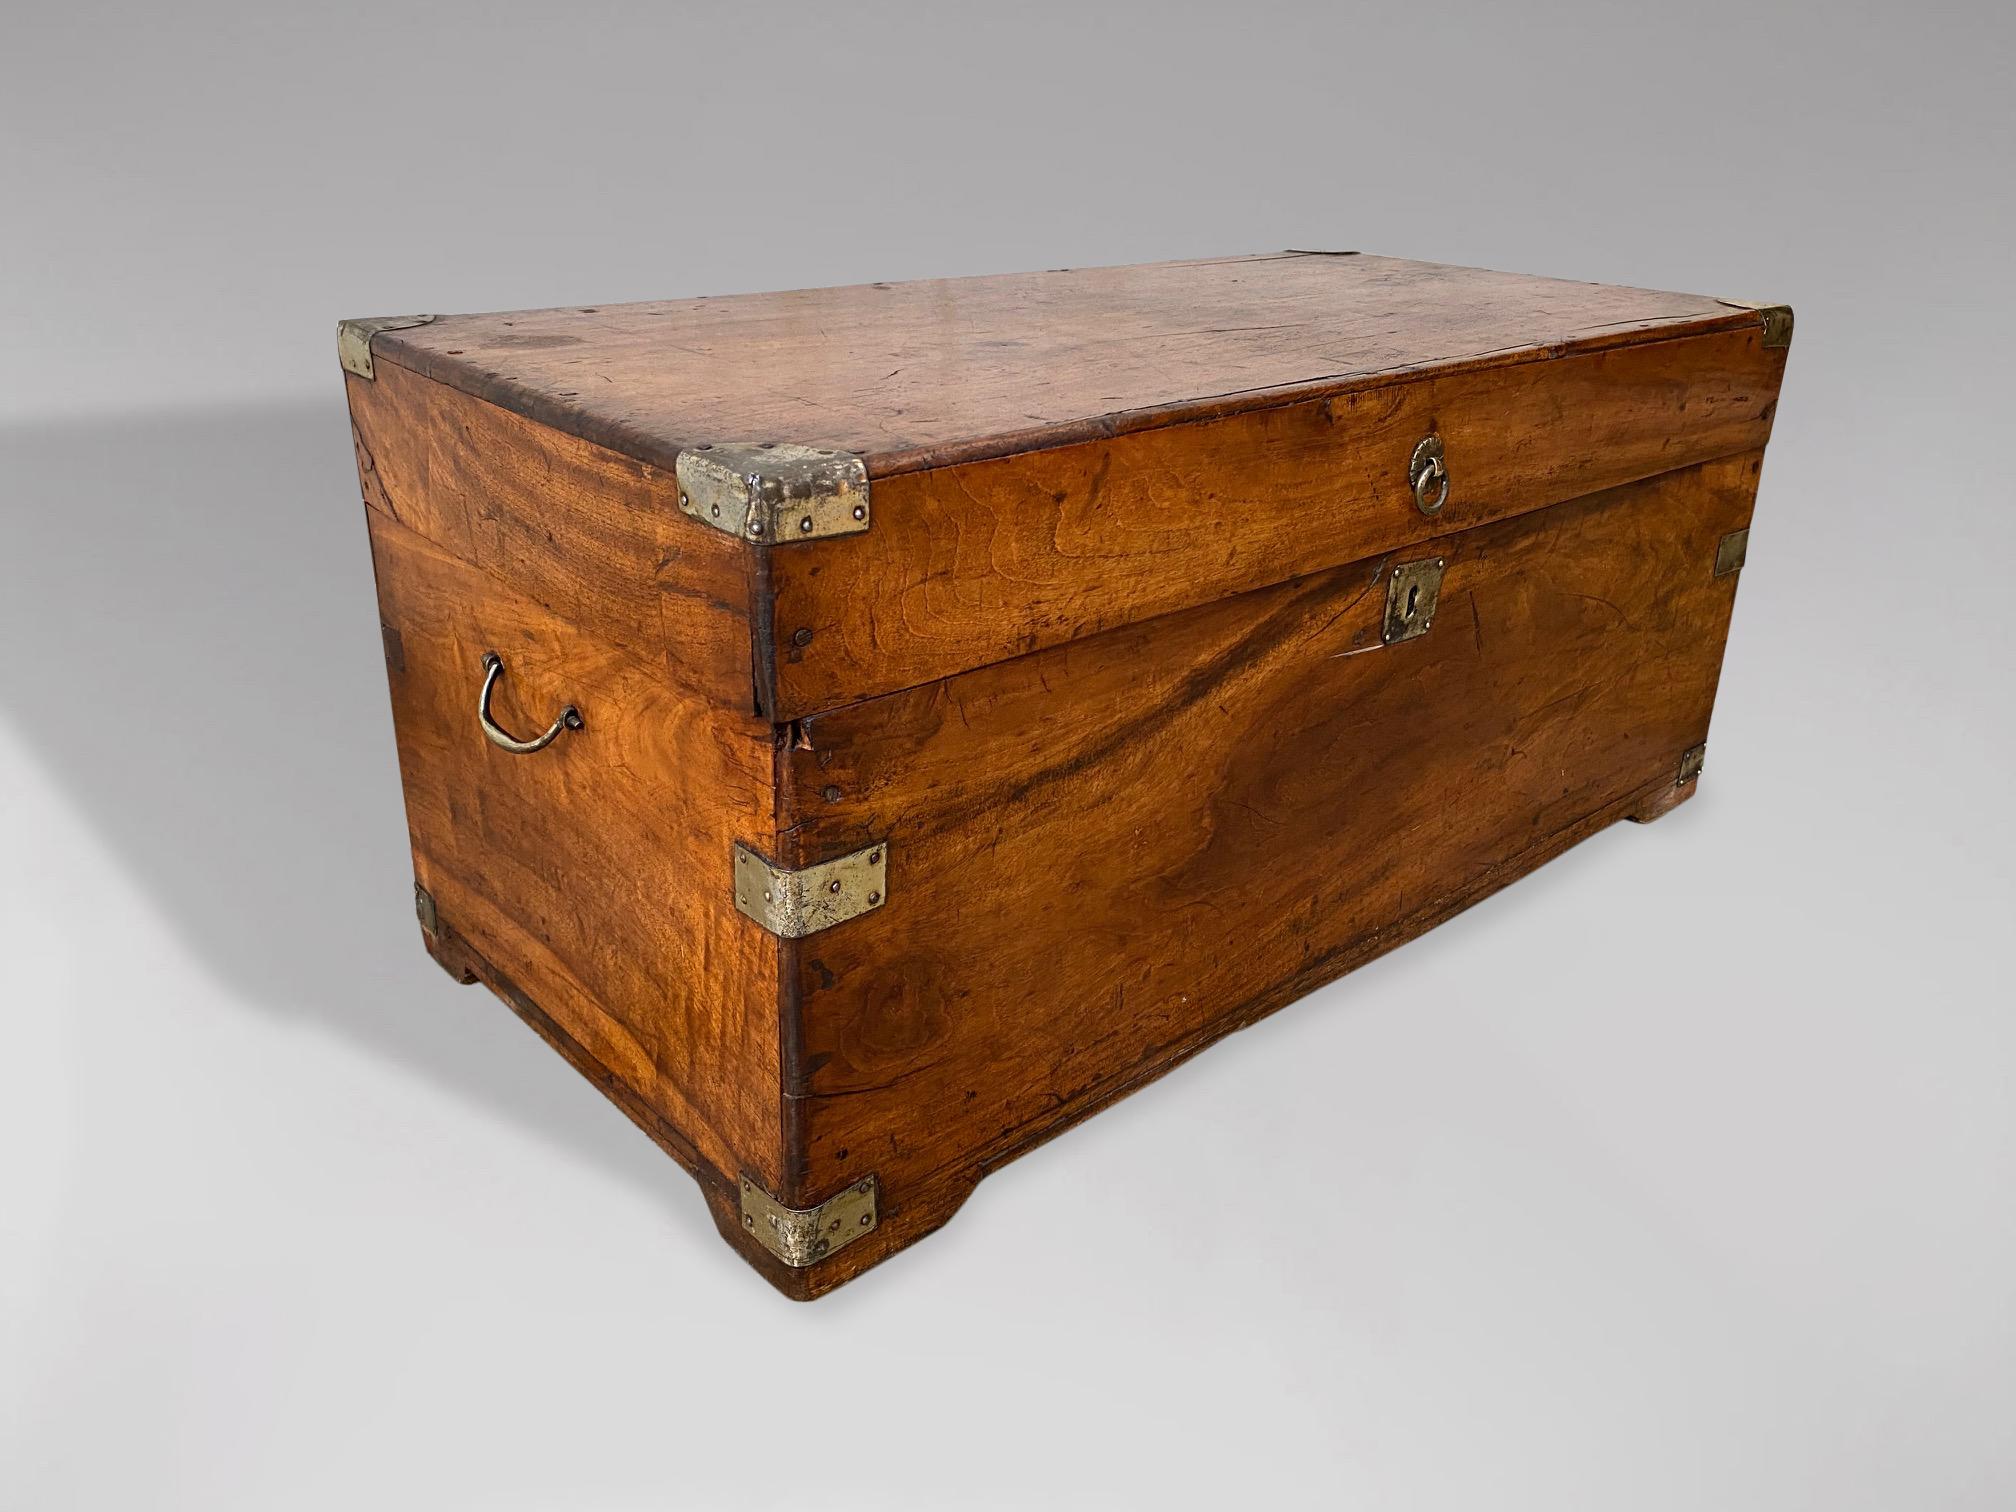 A small late 19th century camphor wood brass bound travelling chest or trunk with brass mounts and brass carrying handles. Warm rich colour and patina.

The dimensions are:
Height: 33cm (13.0in)
Width: 73cm (28.7in)
Depth: 36.5cm (14.4in)

This